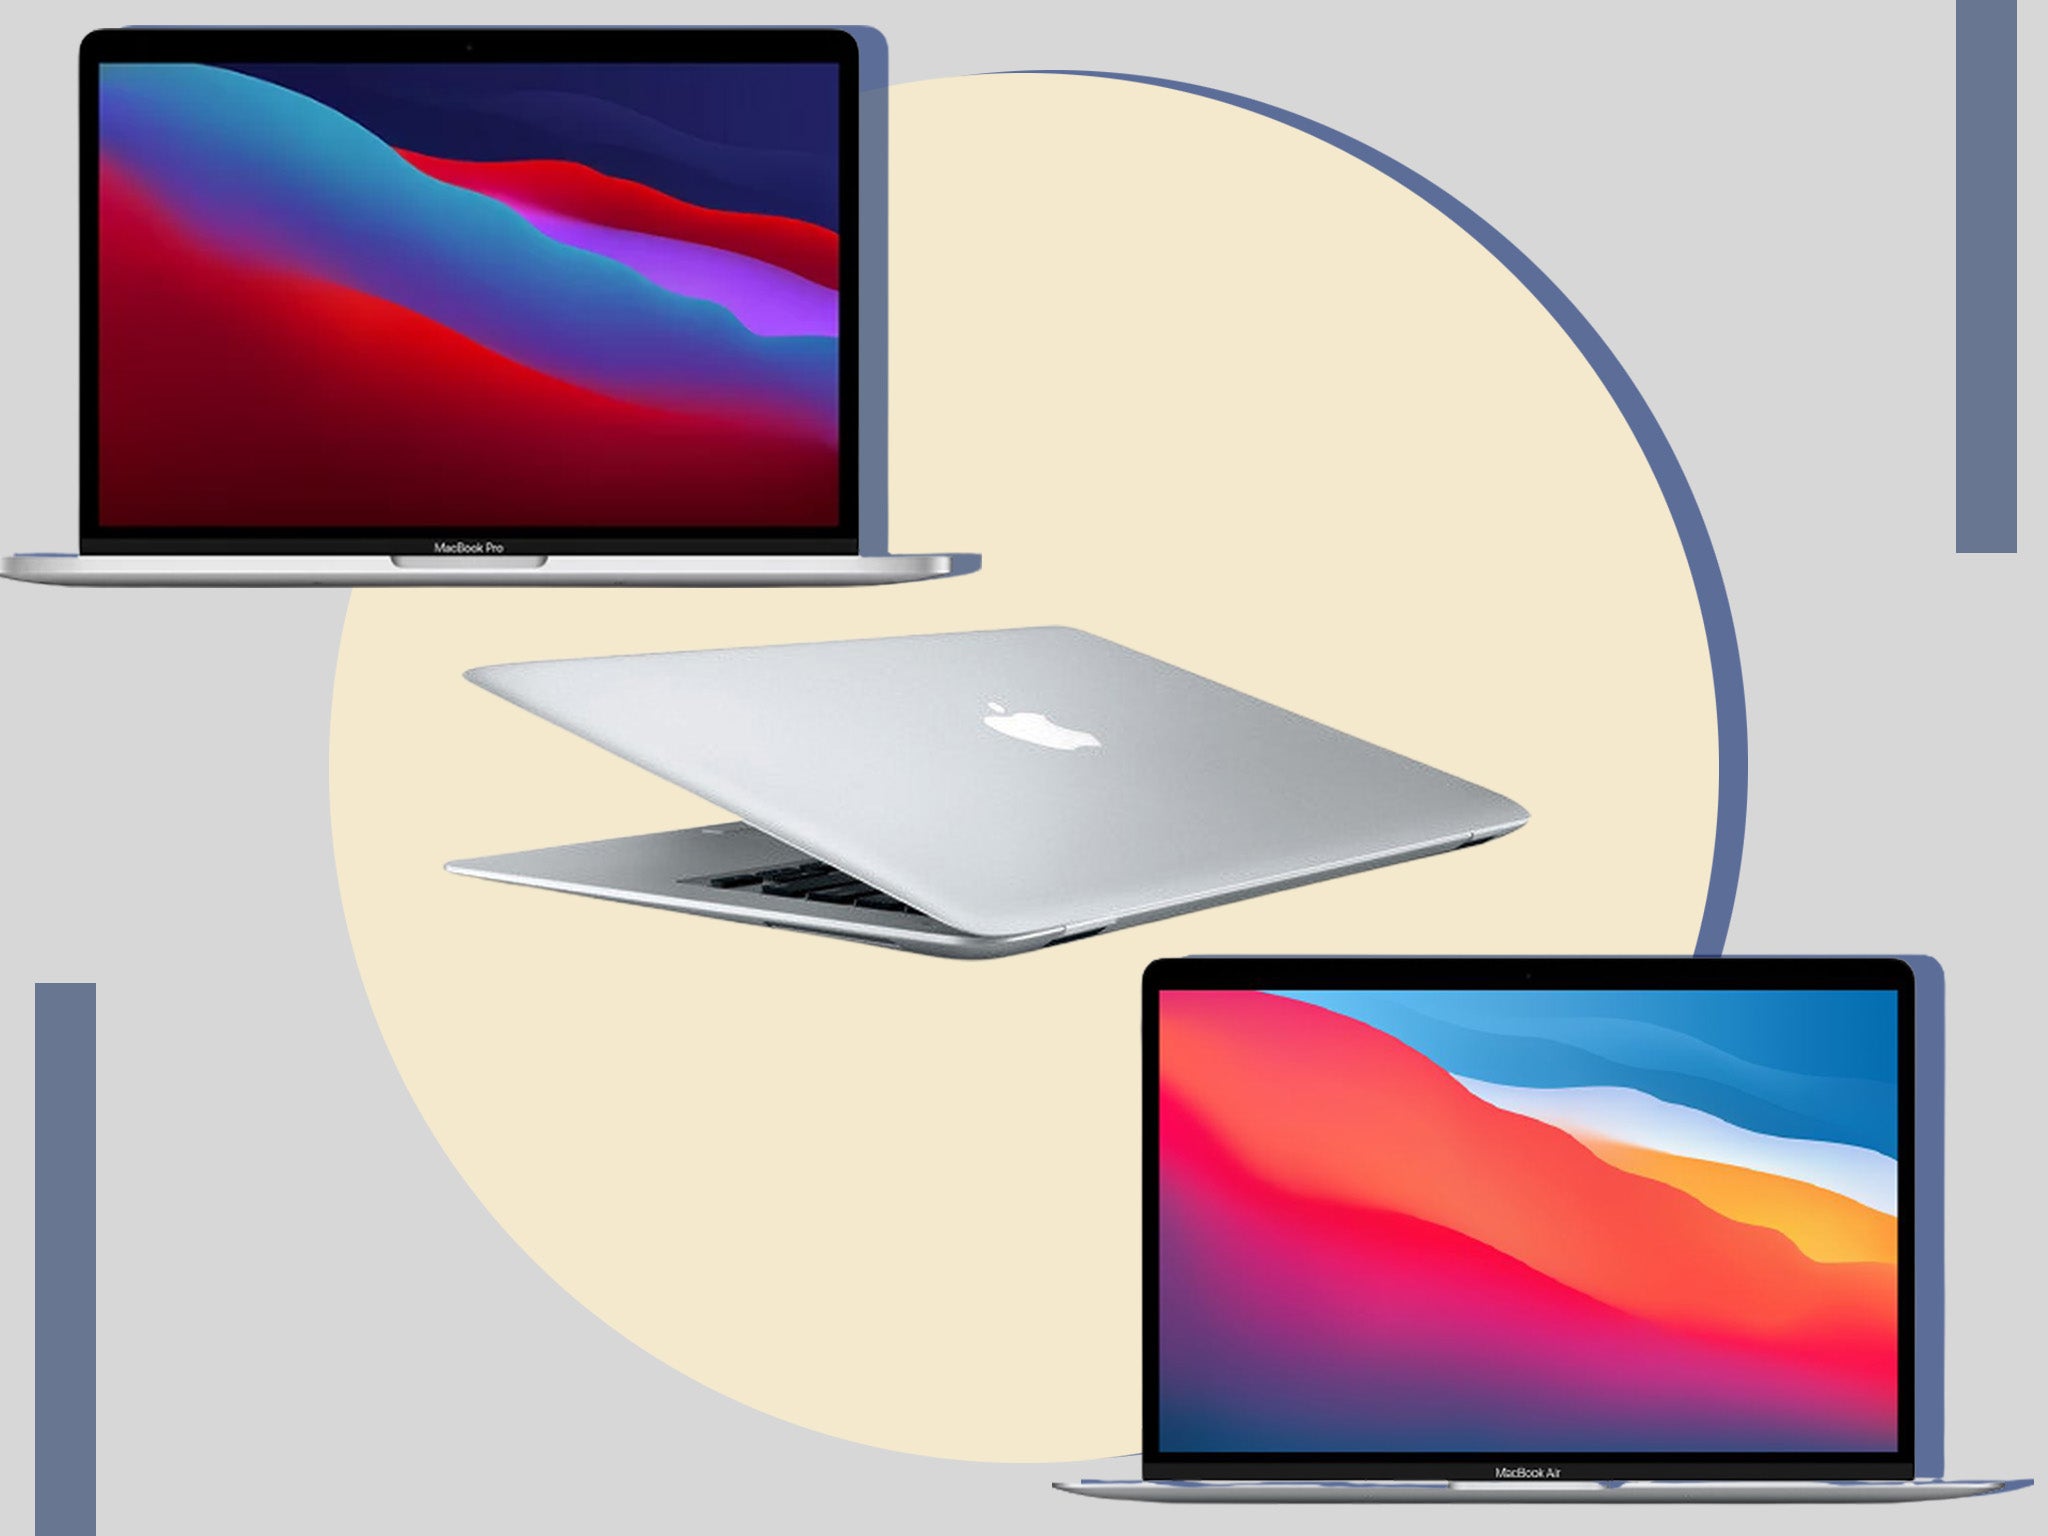 Now, just like the iPhone and iPad, new MacBooks are powered by Apple’s own chips